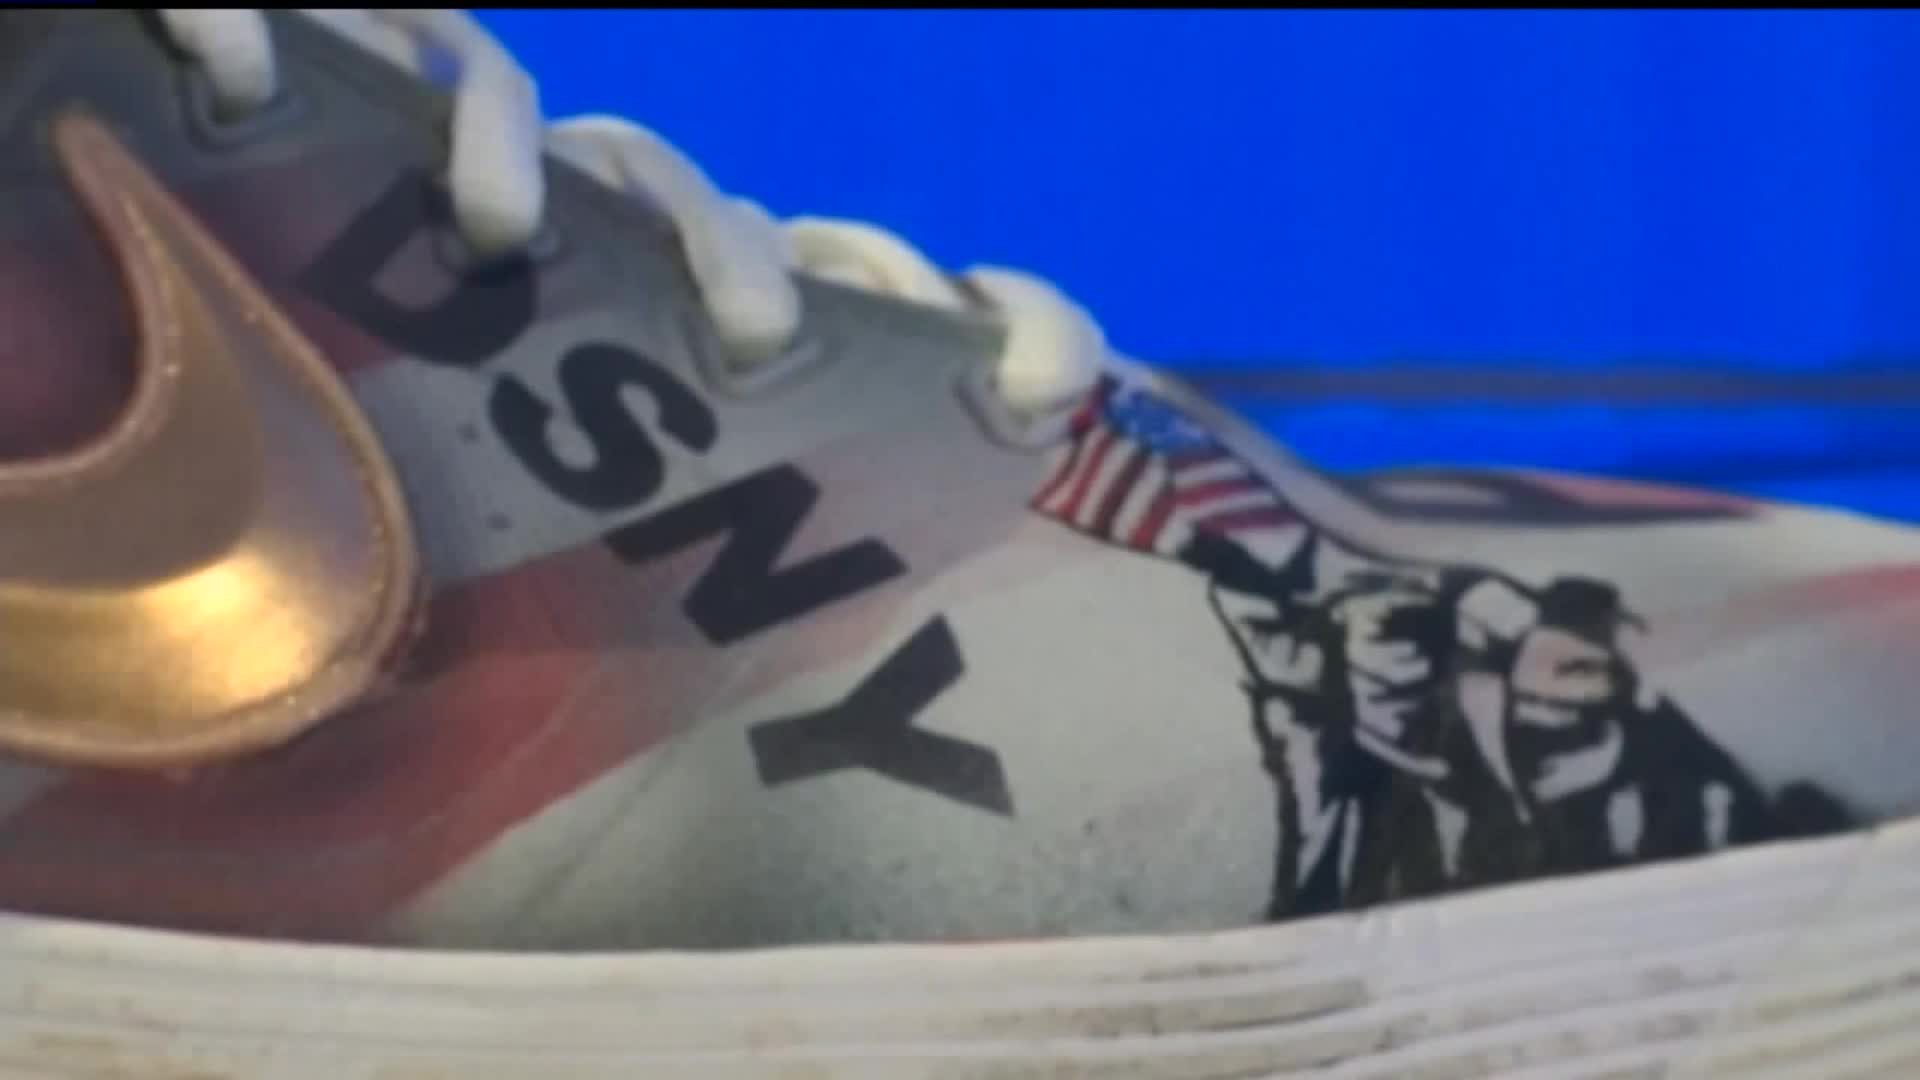 Mets player donates cleats to 9/11 museum